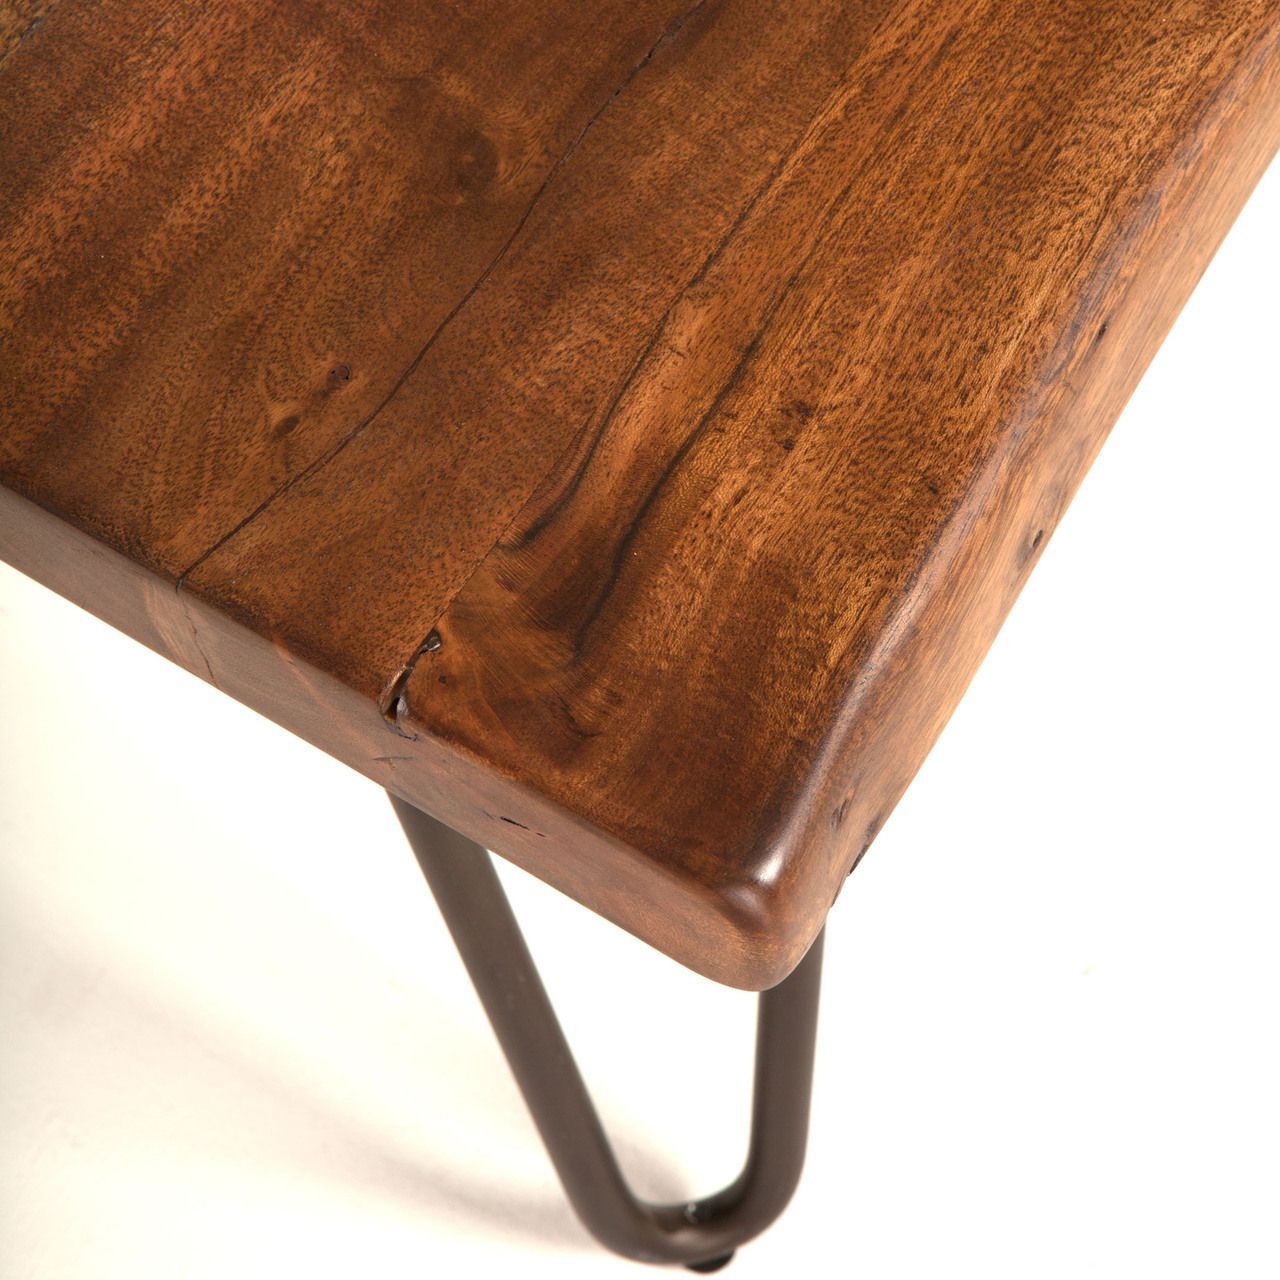 Vail Solid Wood Coffee Table In Walnut W/ Steel Legs | Solid Wood Inside Coffee Tables With Solid Legs (Gallery 11 of 20)